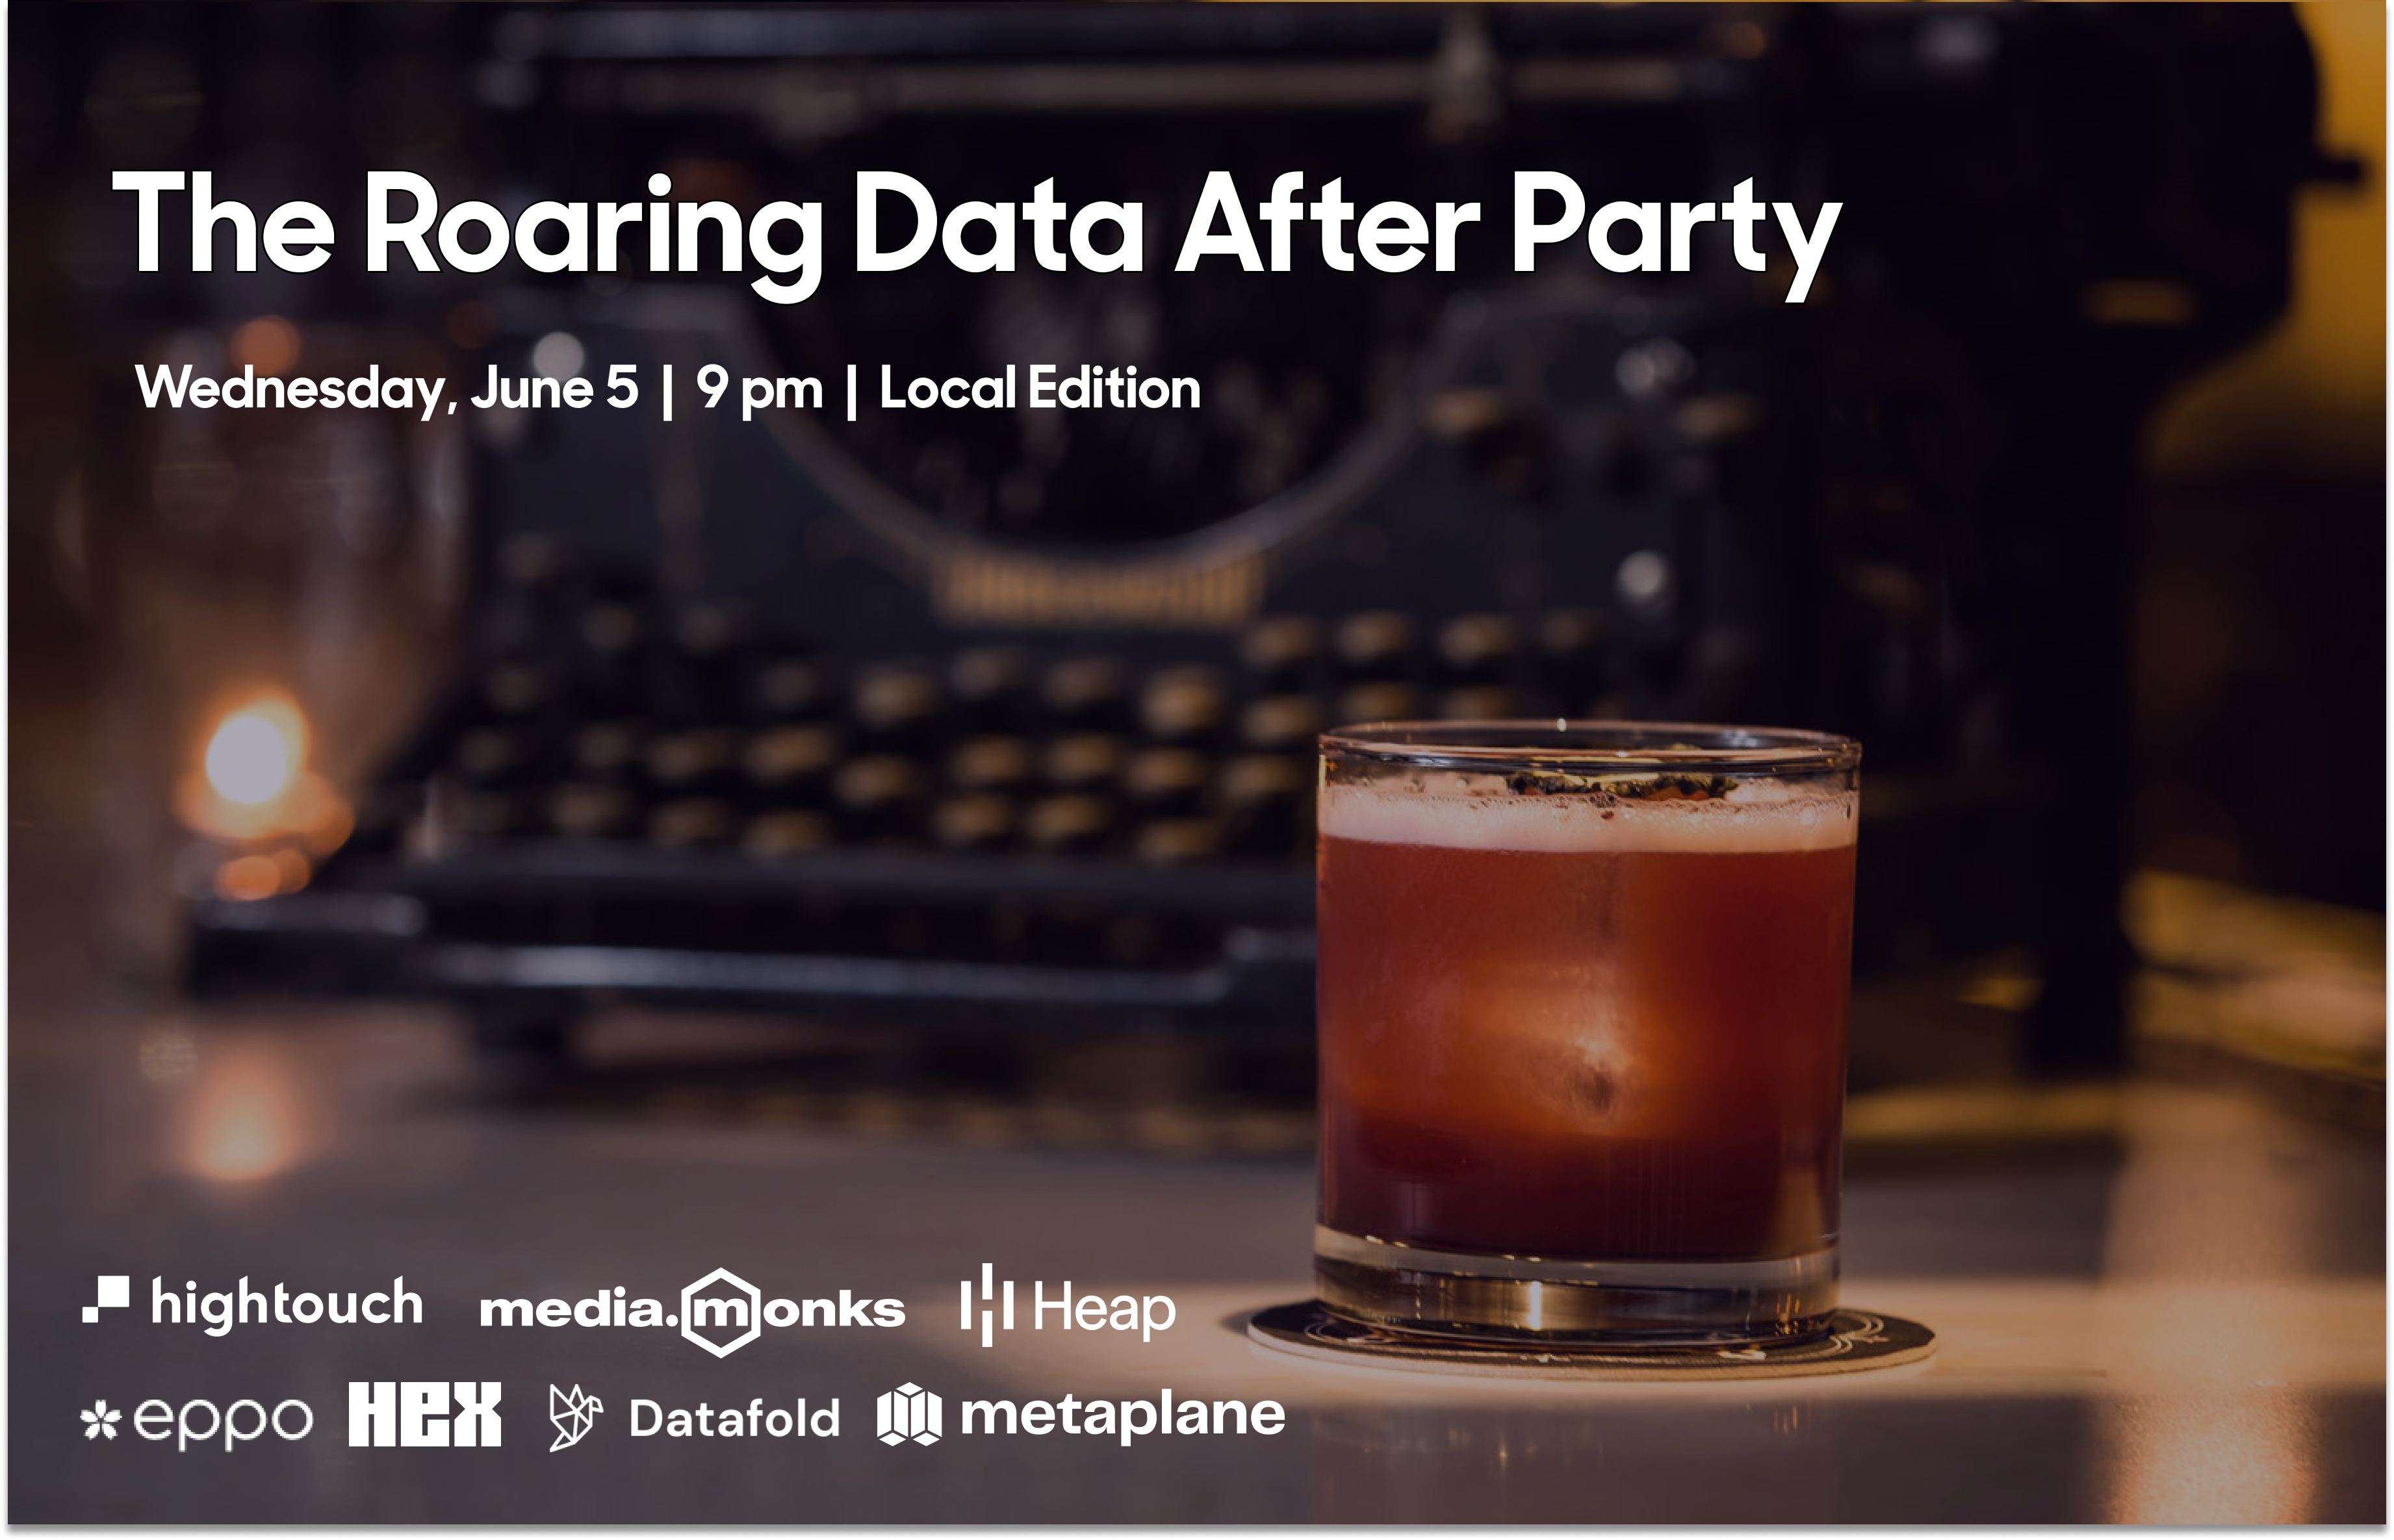 The Roaring Data After Party